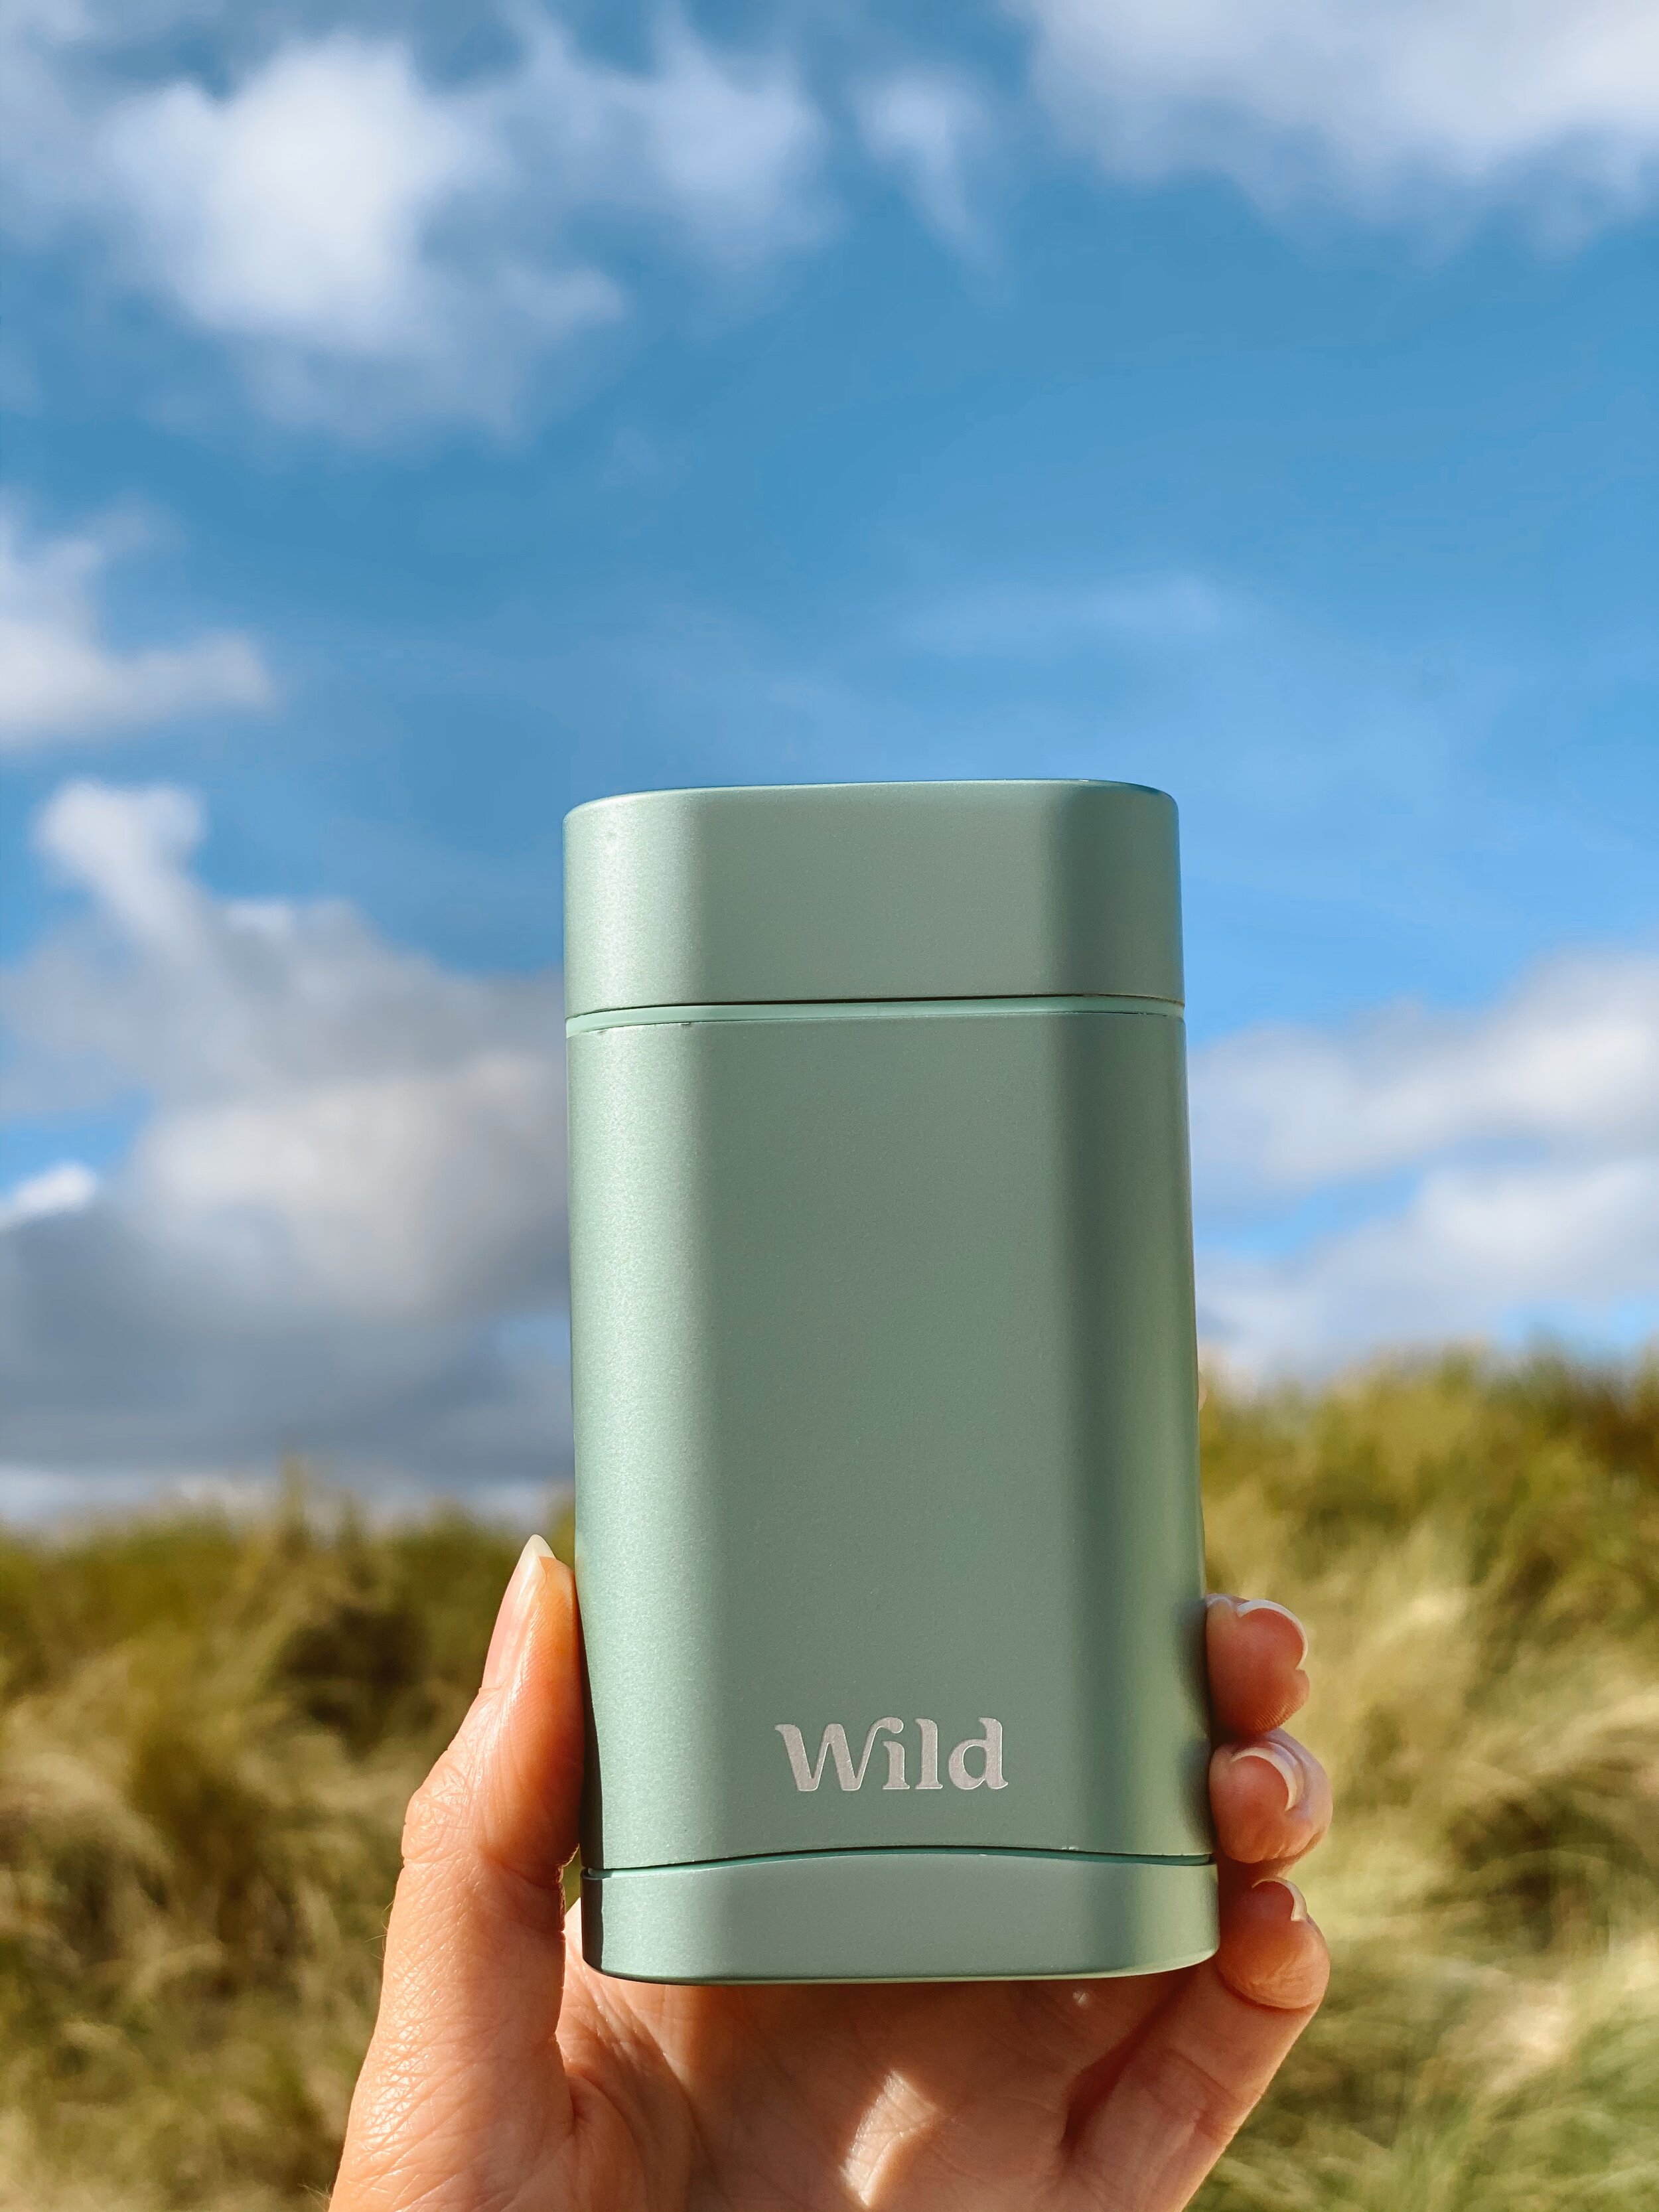 GAIA UK - Introducing Wild Deodorant Redefined ♻️ Wild is the